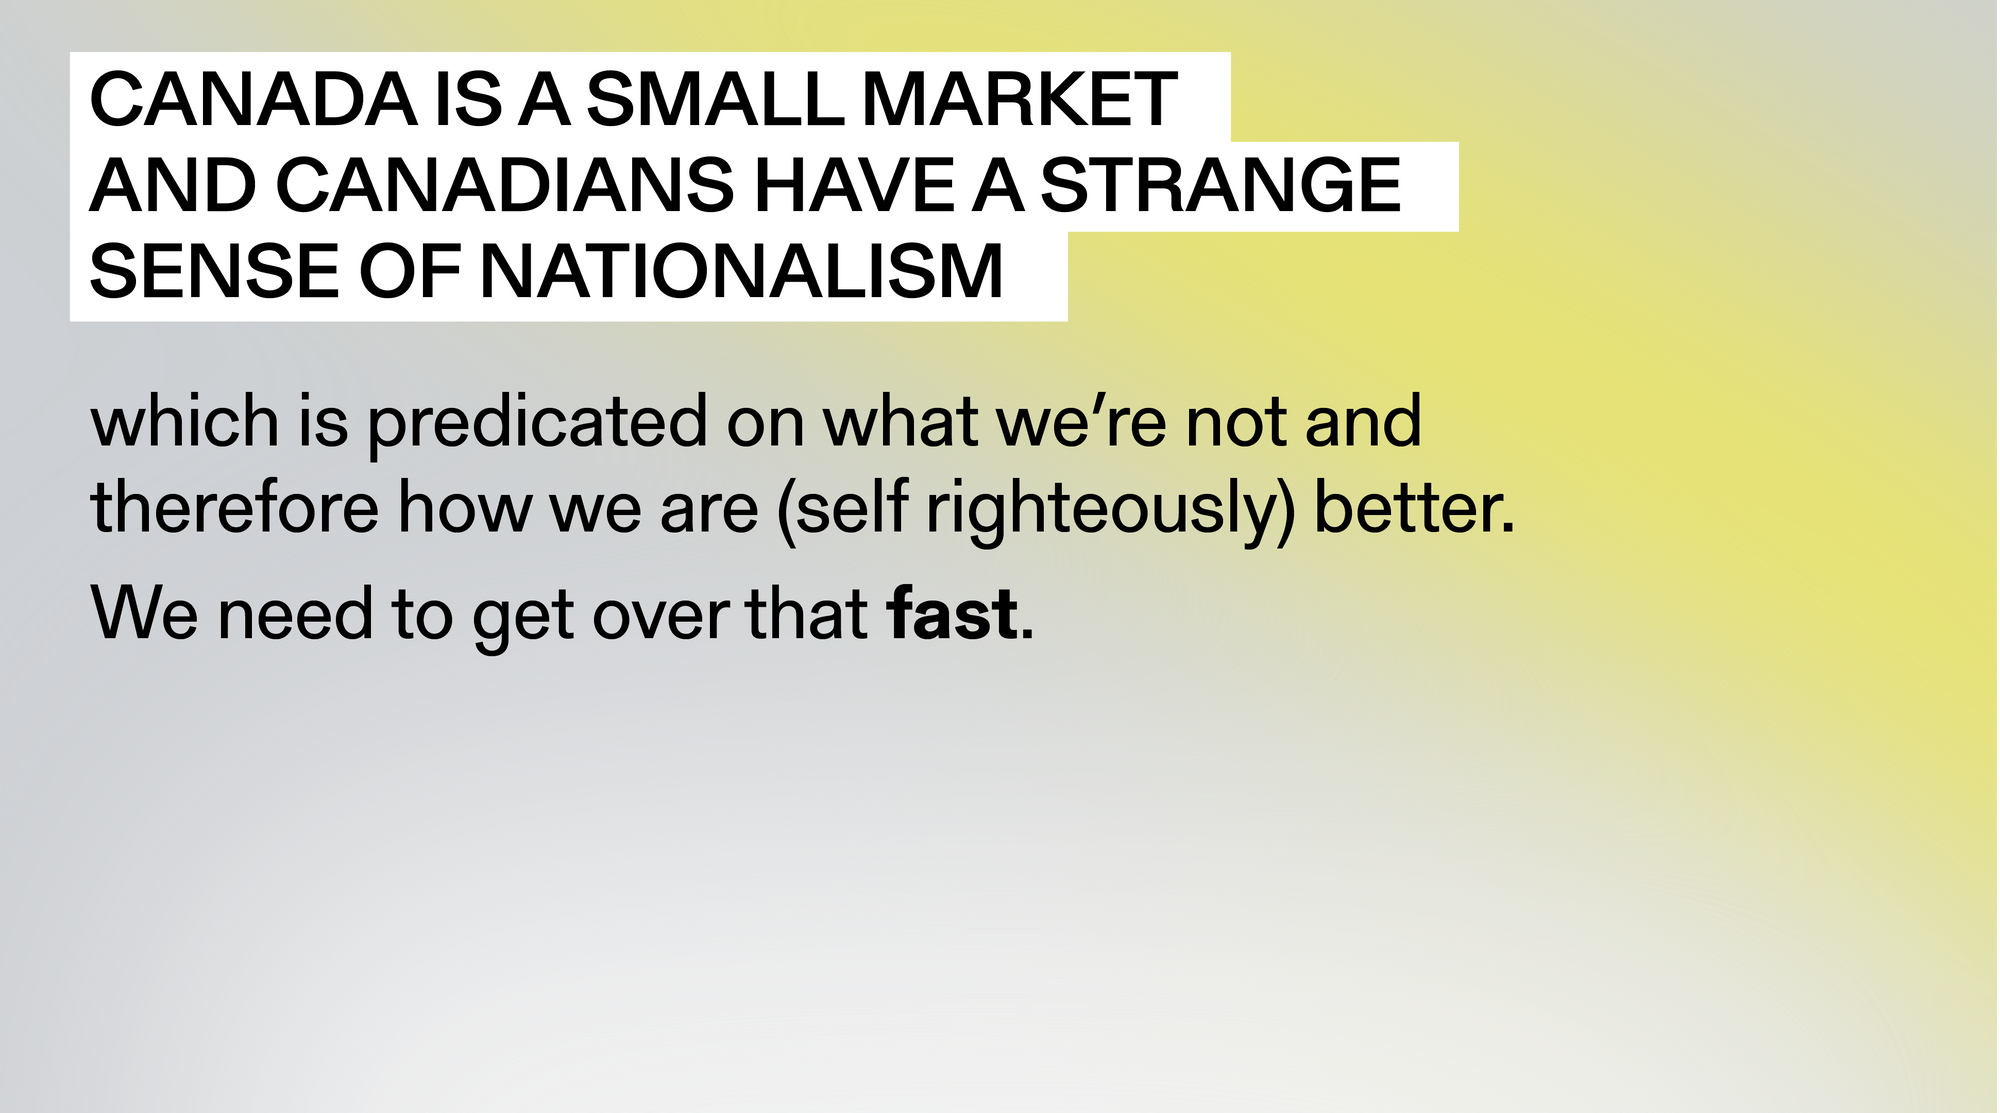 “Canada is a small market and Canadians have a strange sense of nationalism which is predicated on what we're not and therefore how we are (self righteously) better. We need to get over that FAST”